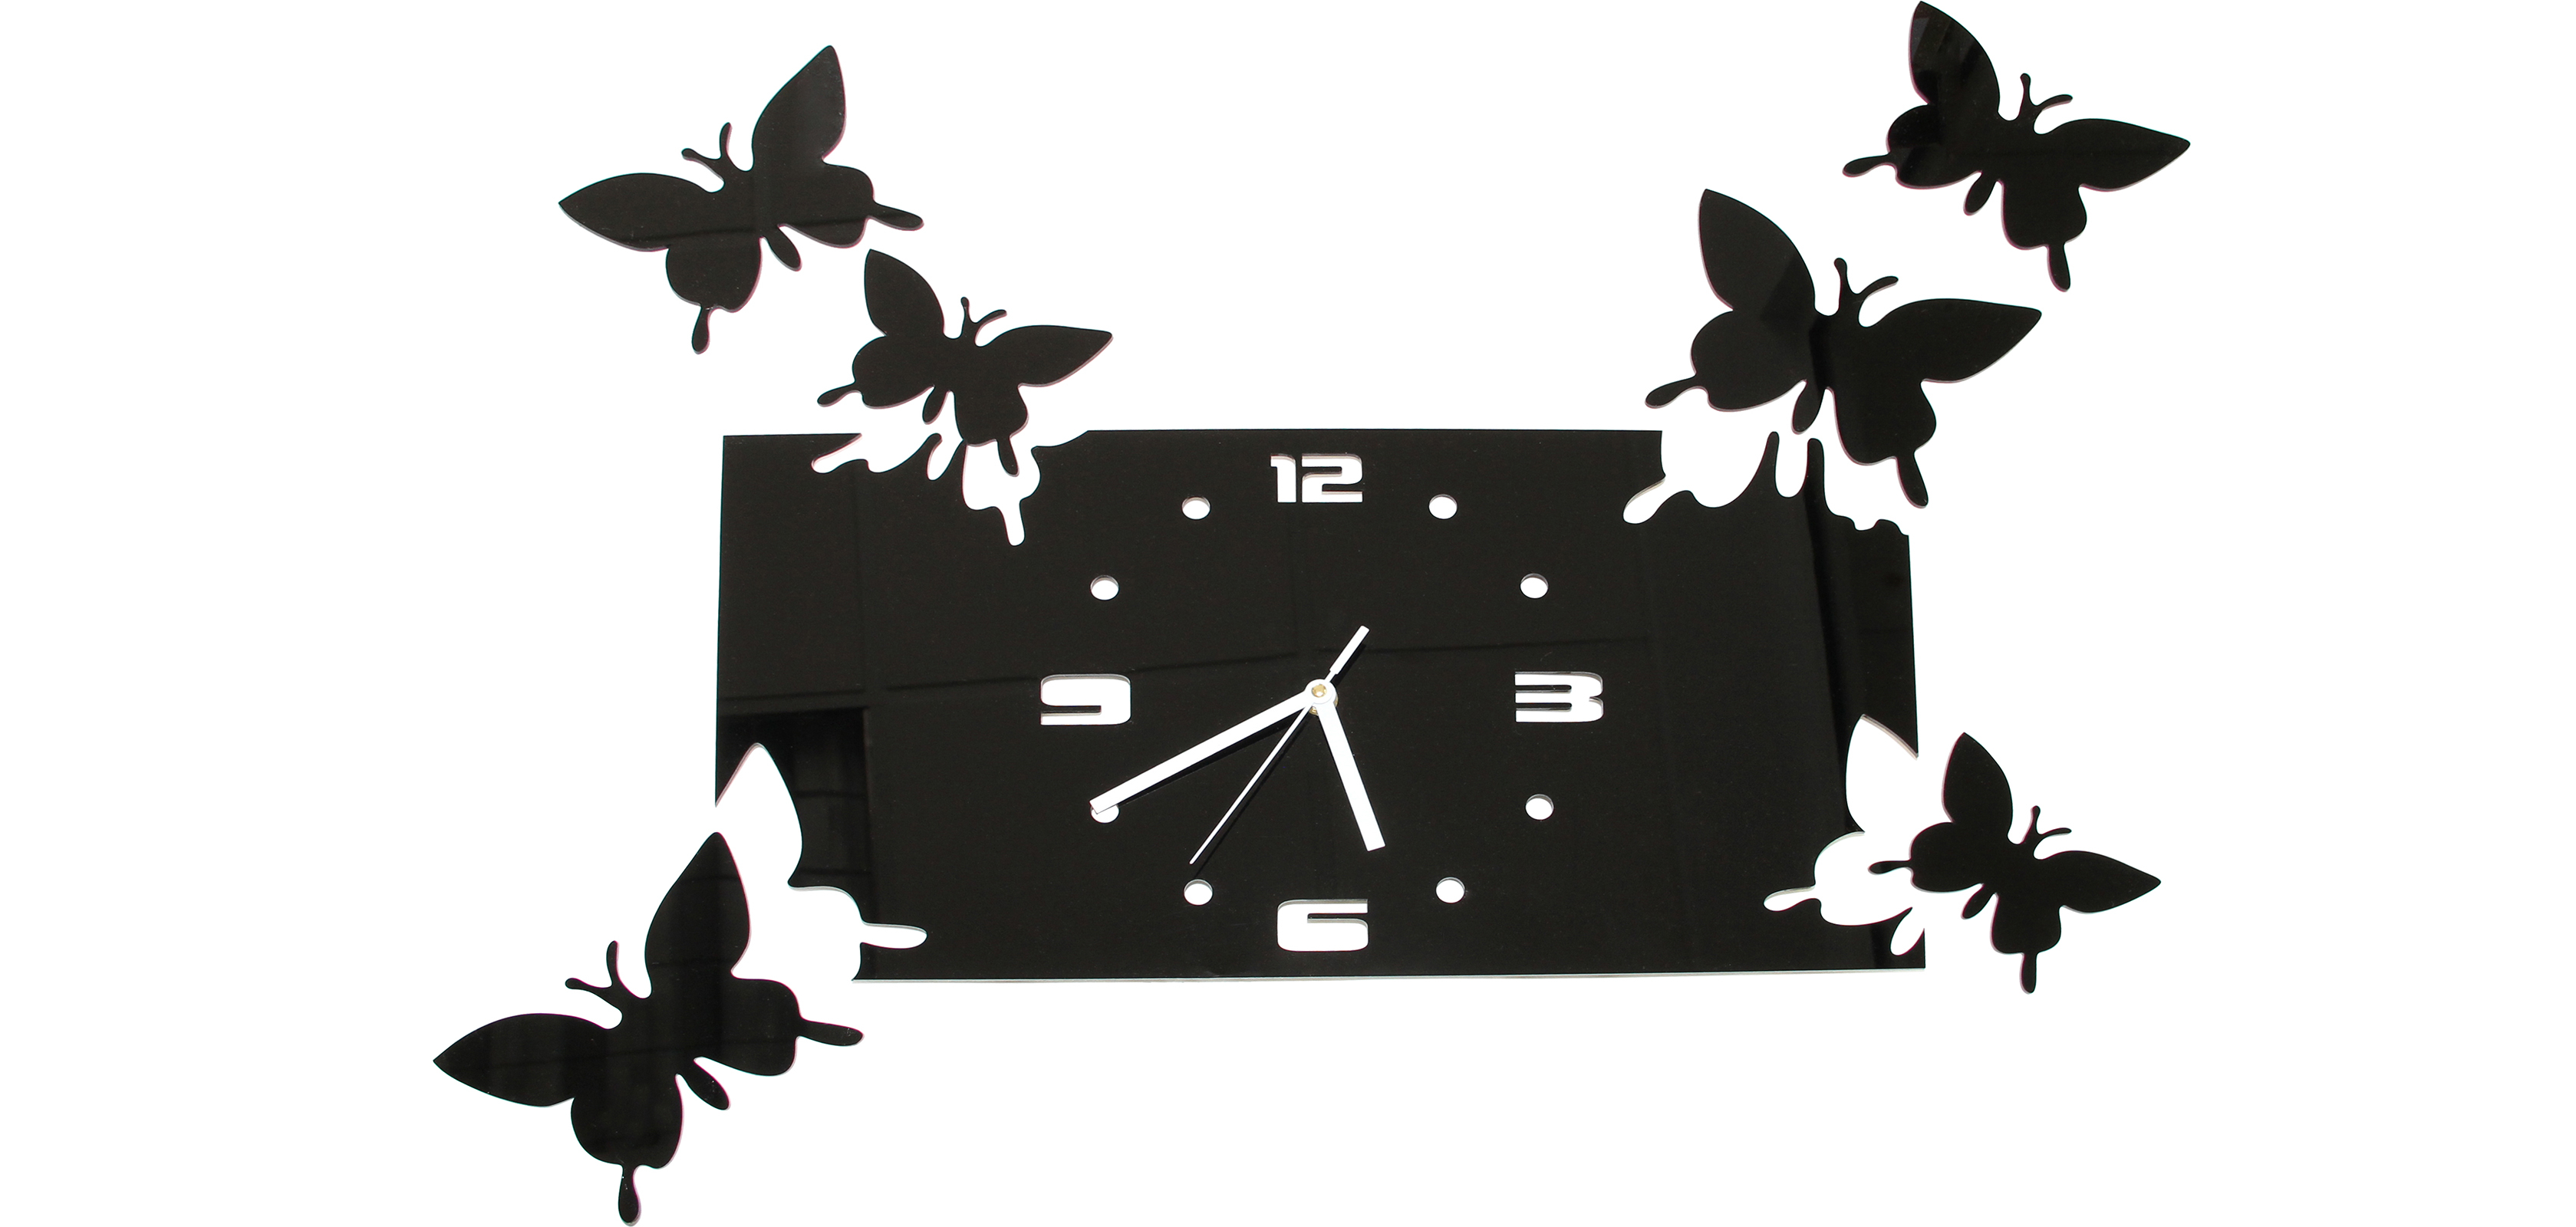 Buy Butterflies Square Wall Clock Black 58210 - in the UK